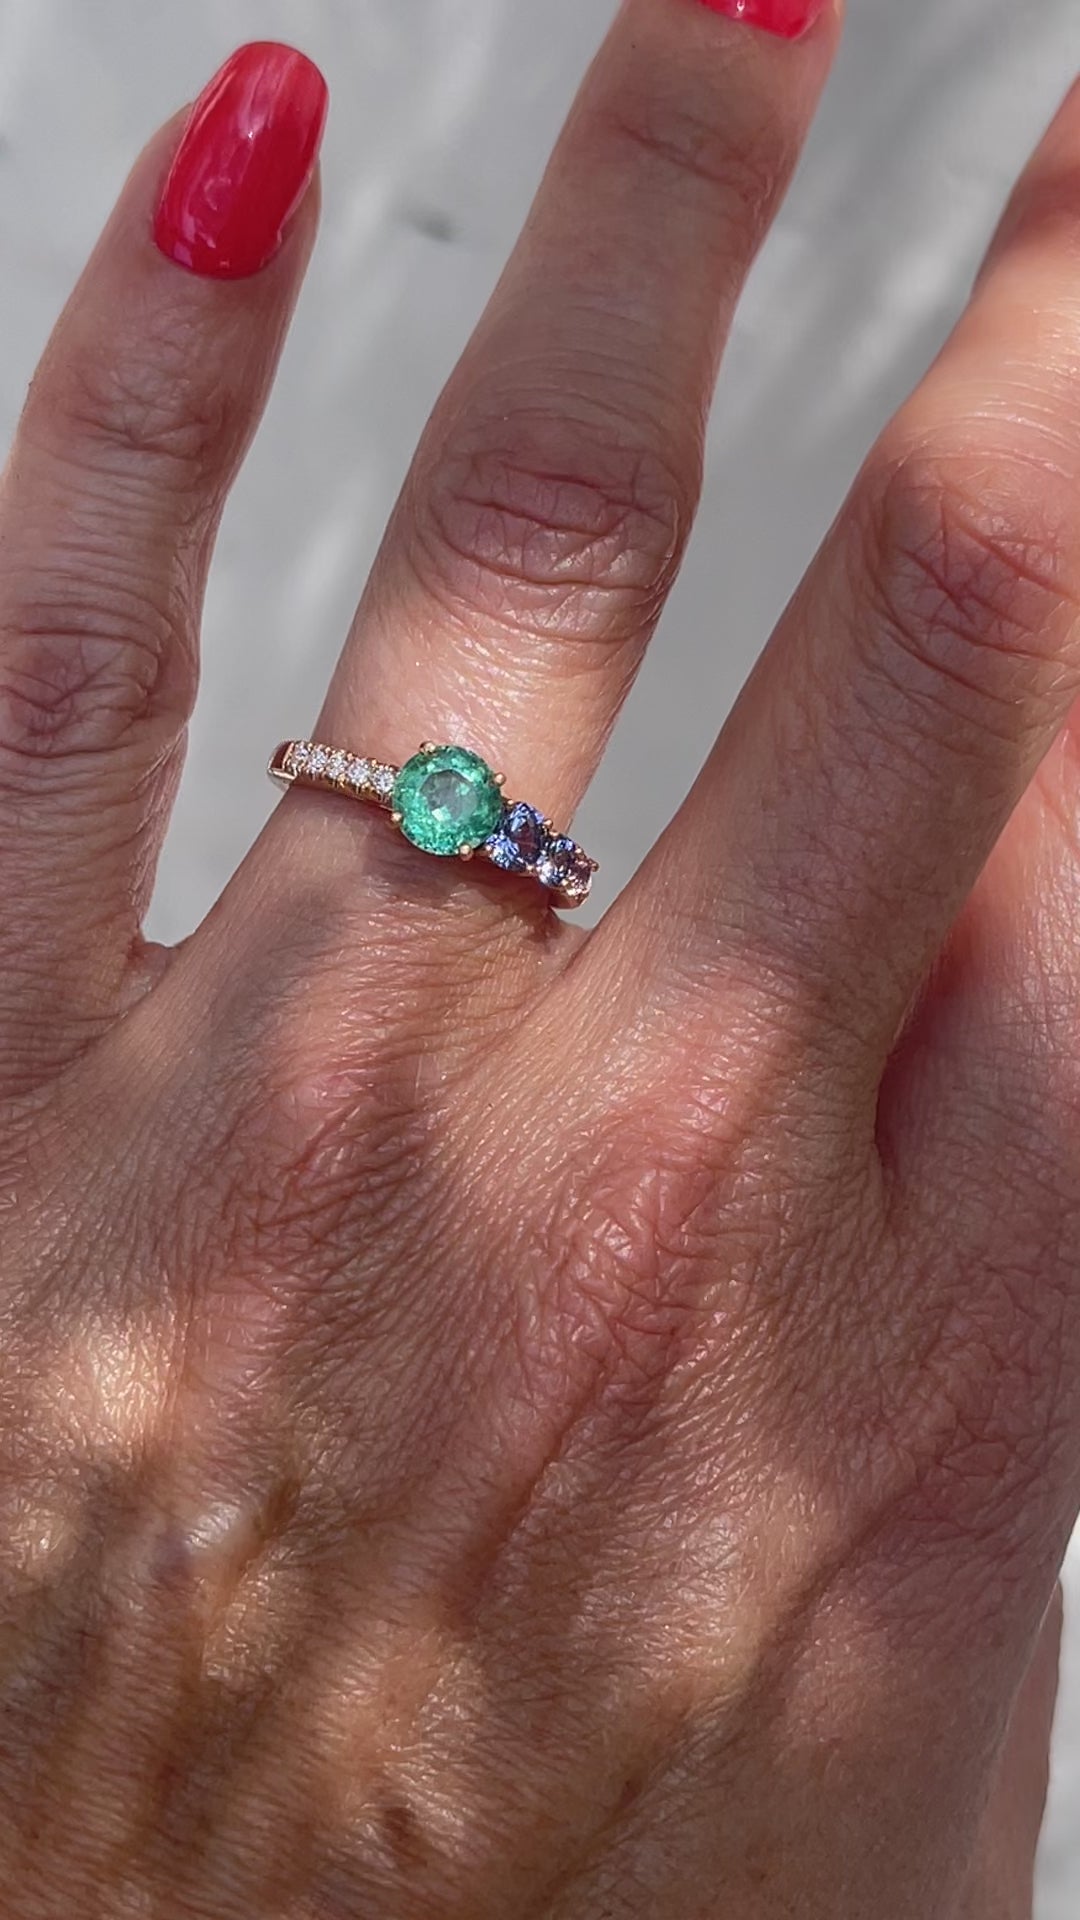 A Colombian Emerald Ring by NIXIN Jewelry modeled on the hand. The emerald diamond ring is made in rose gold and has purple sapphires cascading down one side.